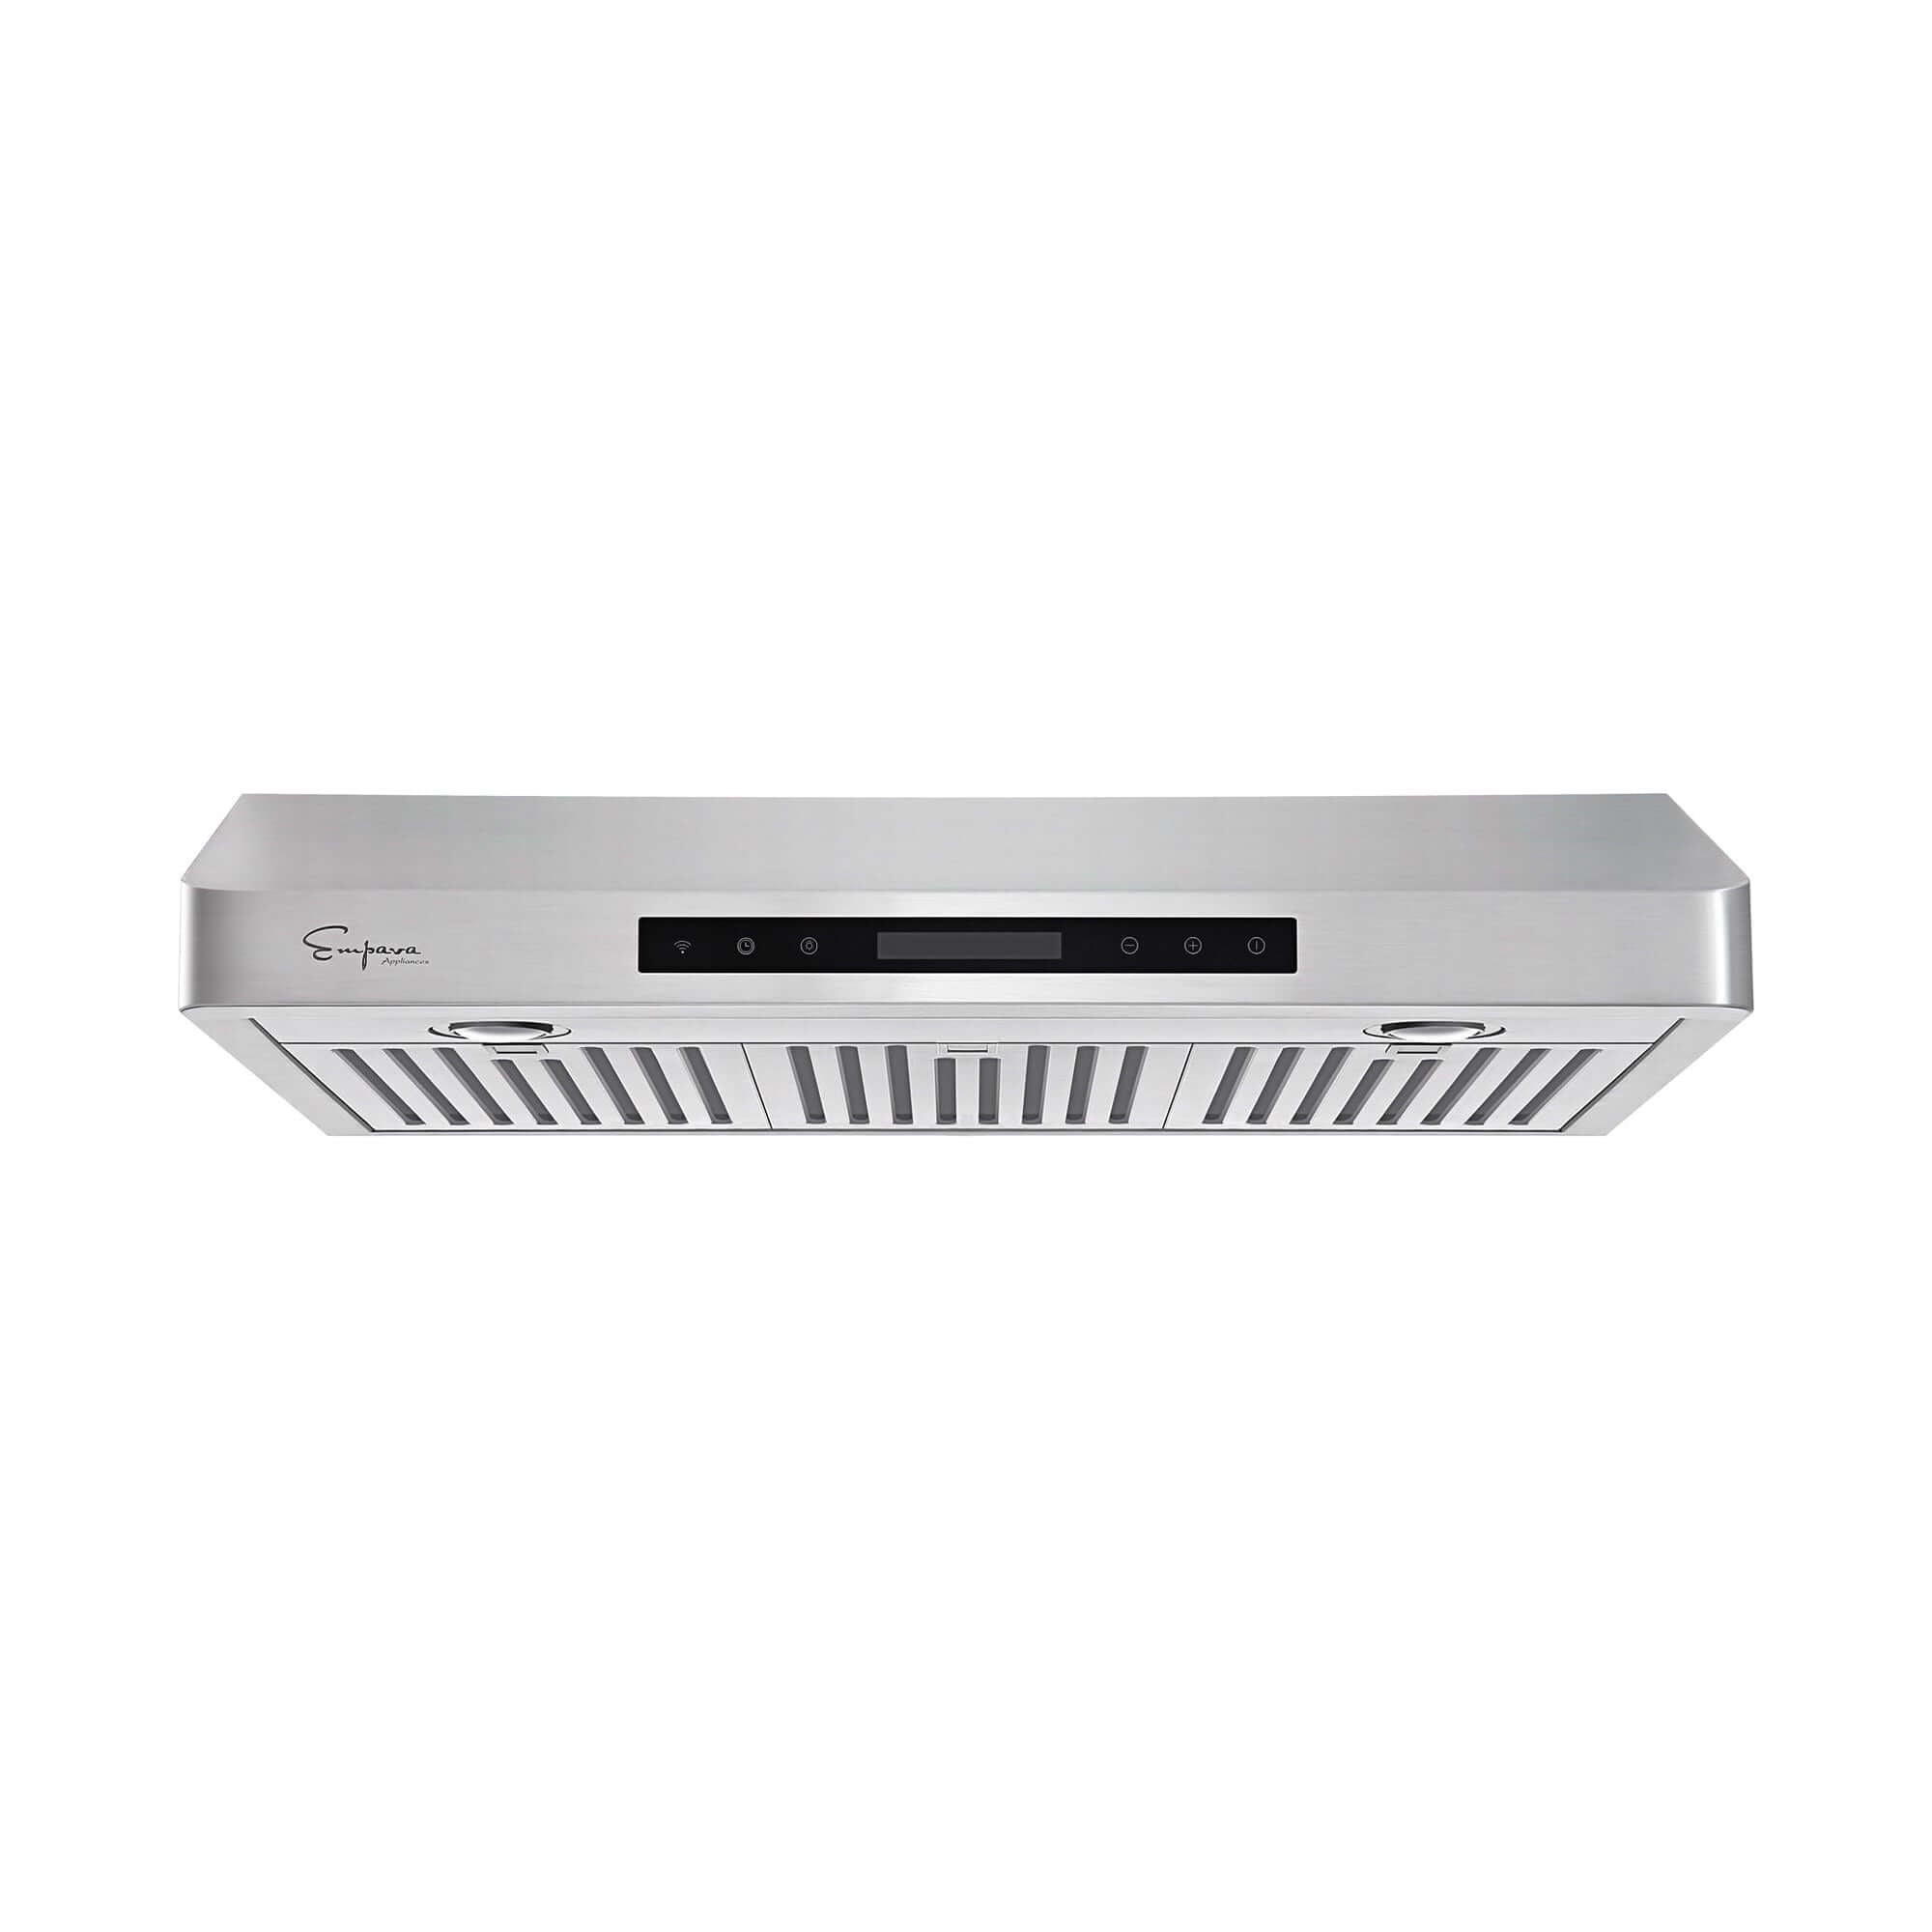 Empava 30 in. Ducted Under Cabinet Range Hood in Stainless Steel (30RH13)